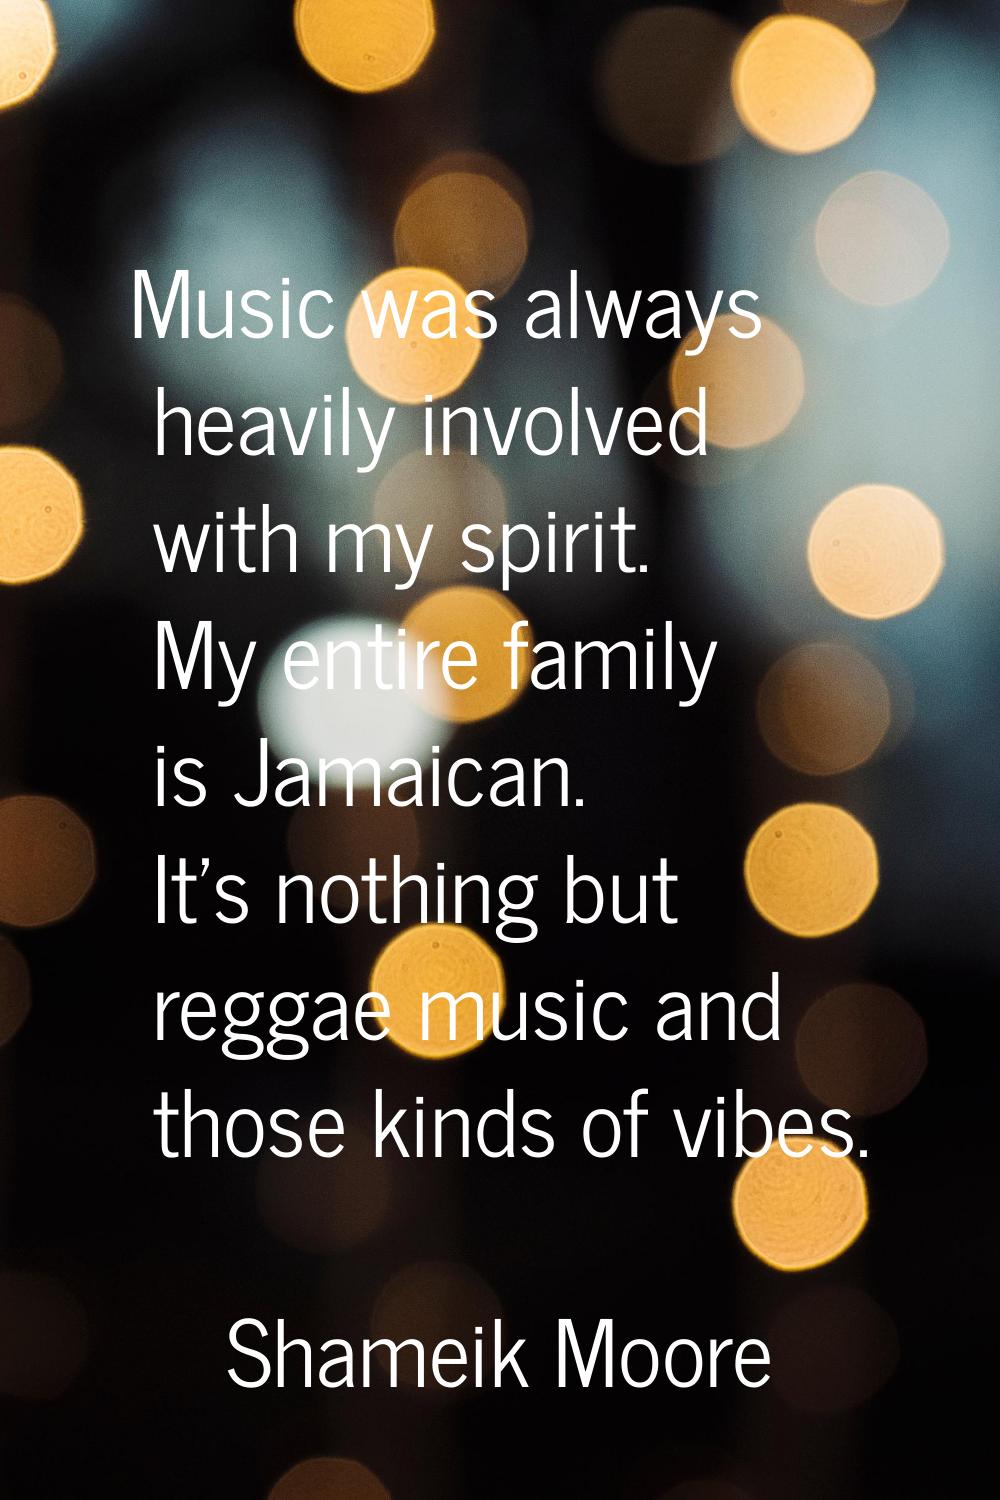 Music was always heavily involved with my spirit. My entire family is Jamaican. It's nothing but re